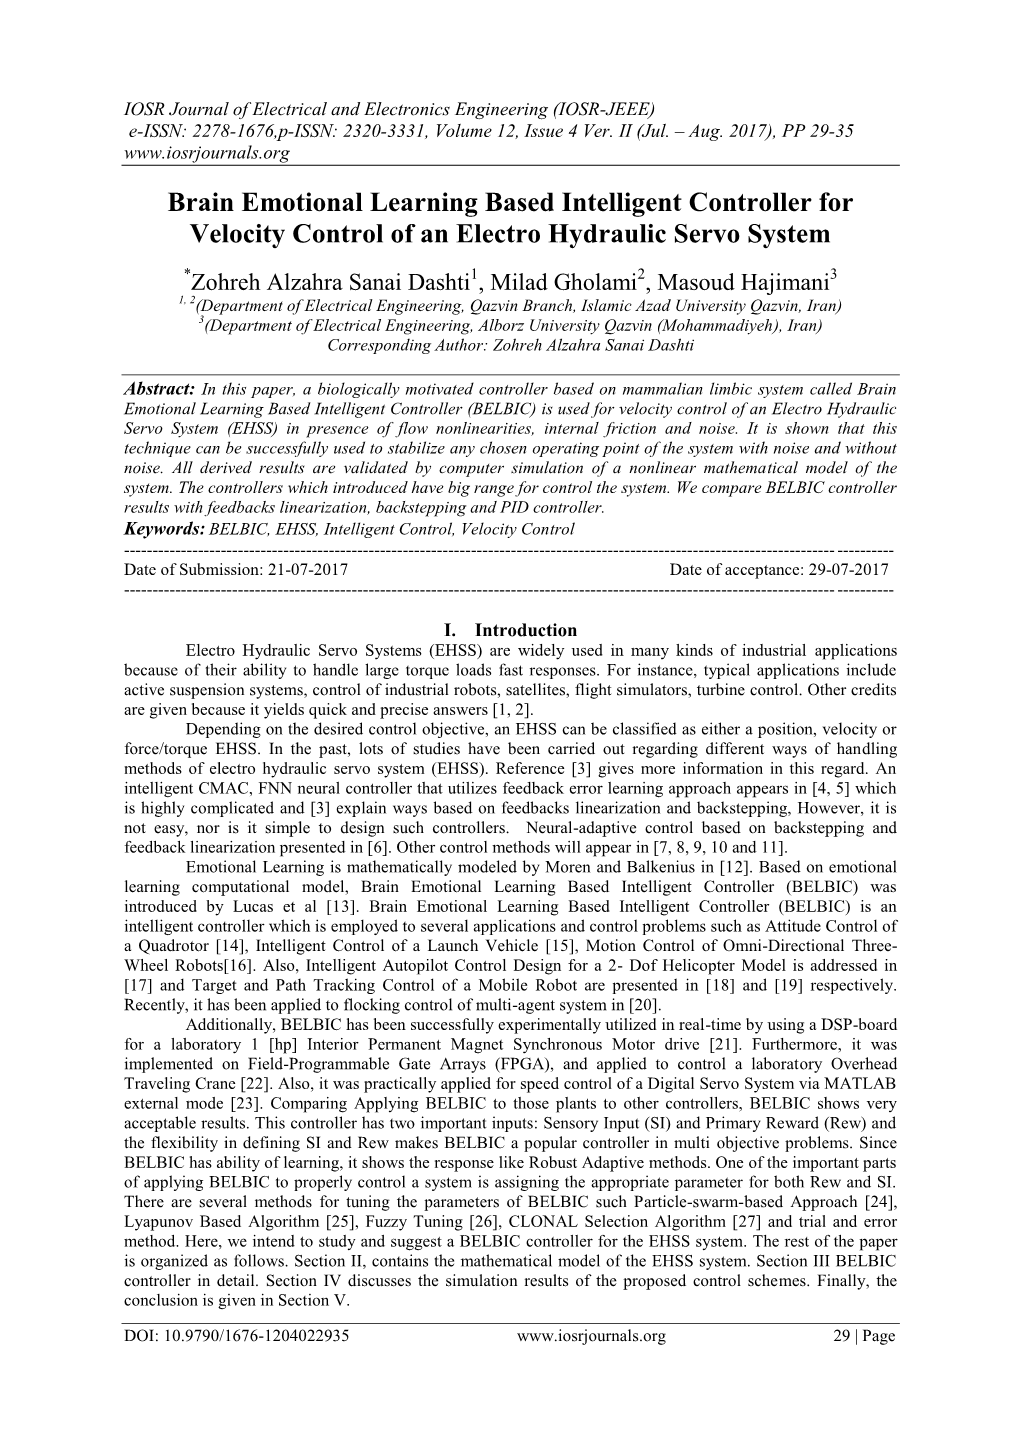 Brain Emotional Learning Based Intelligent Controller for Velocity Control of an Electro Hydraulic Servo System